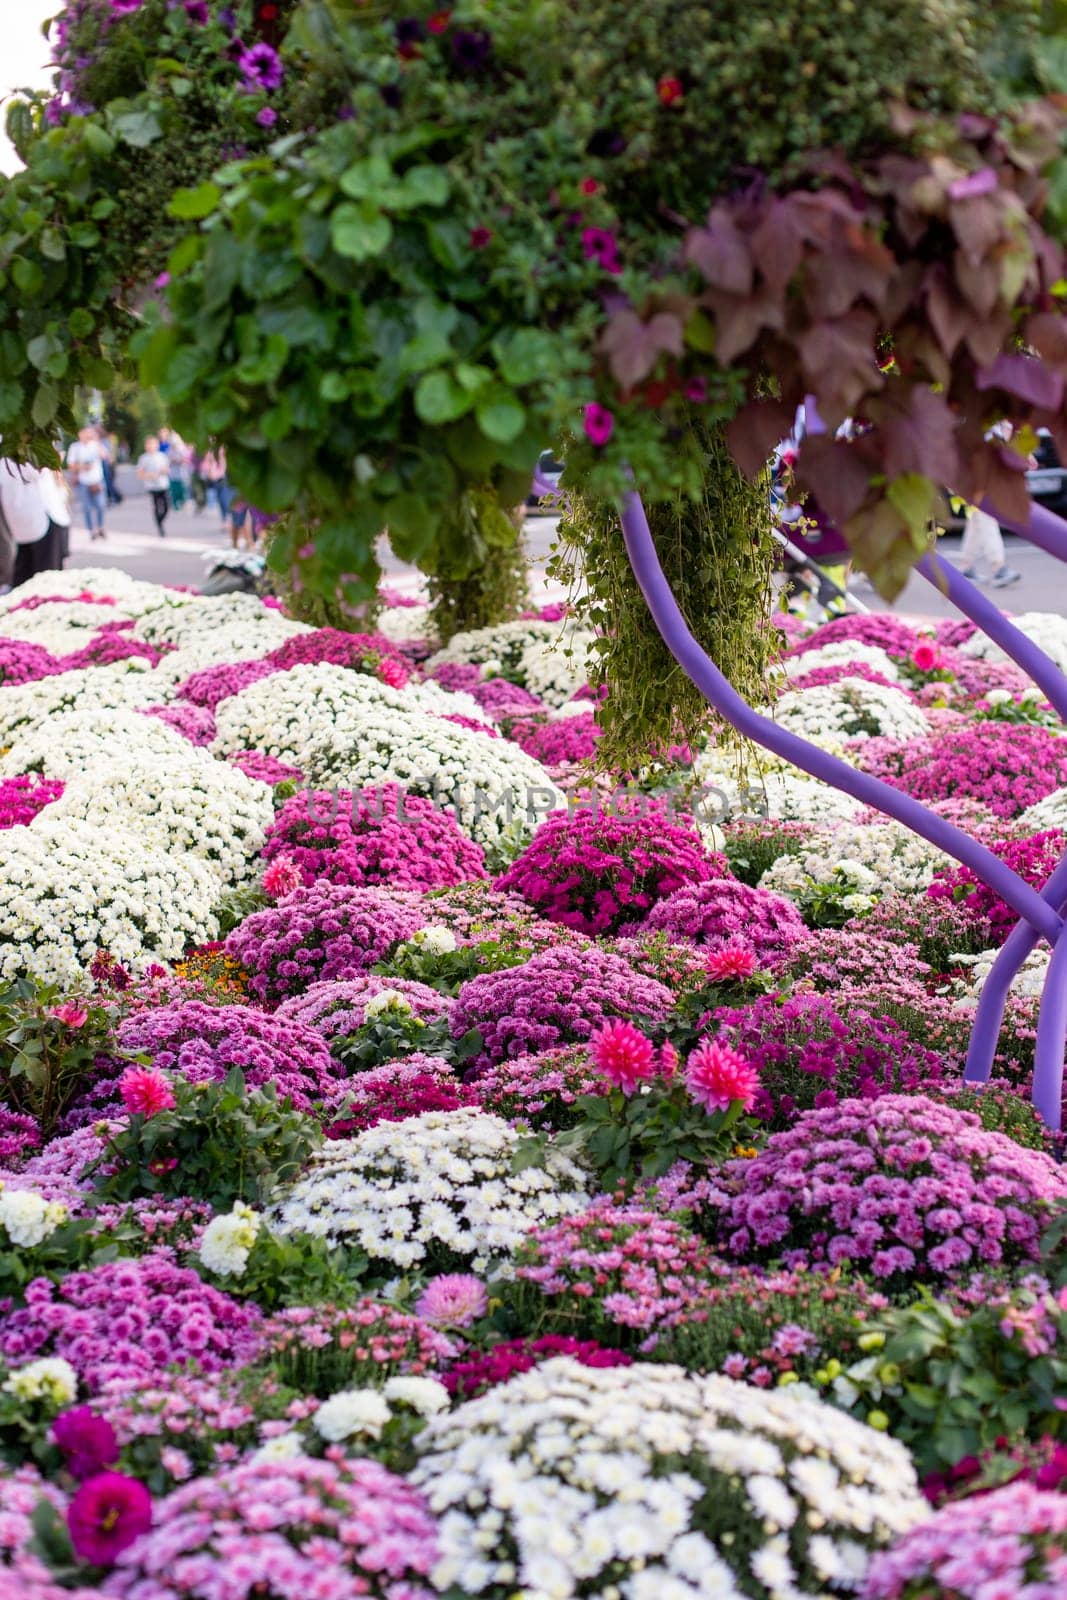 A lush garden of blooming chrysanthemums in various shades of pink, purple, and white flowers by Zakharova